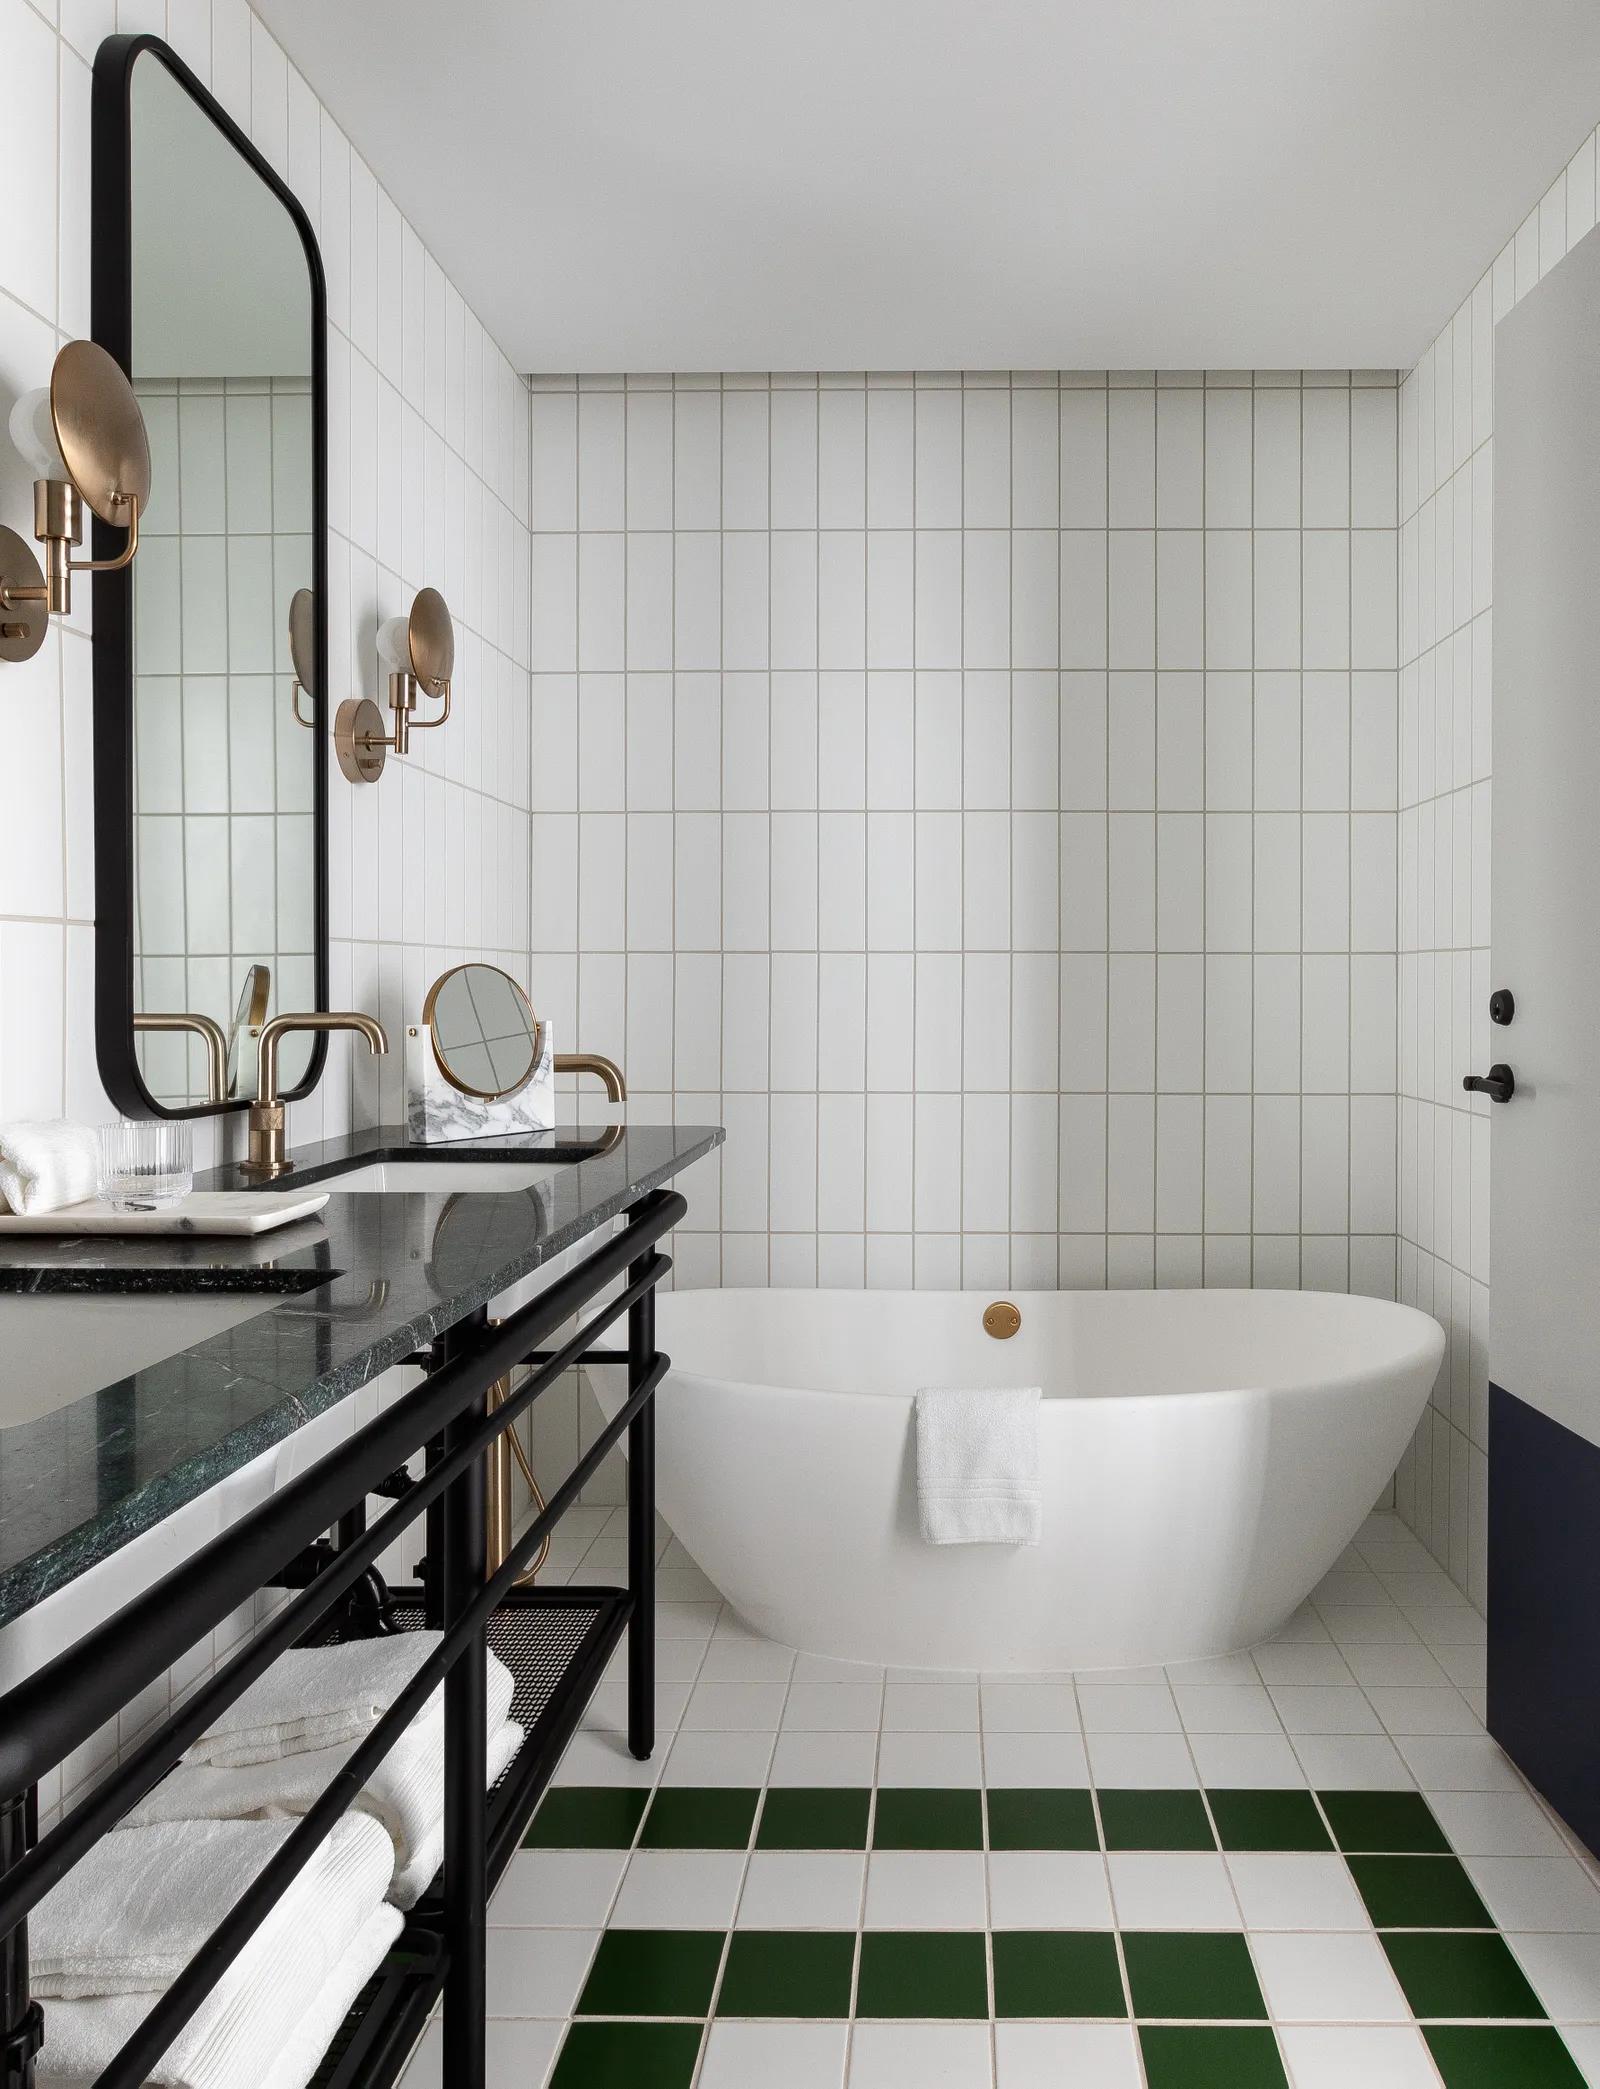 A beautifully green and white tiled bathroom in the Woodlark Hotel